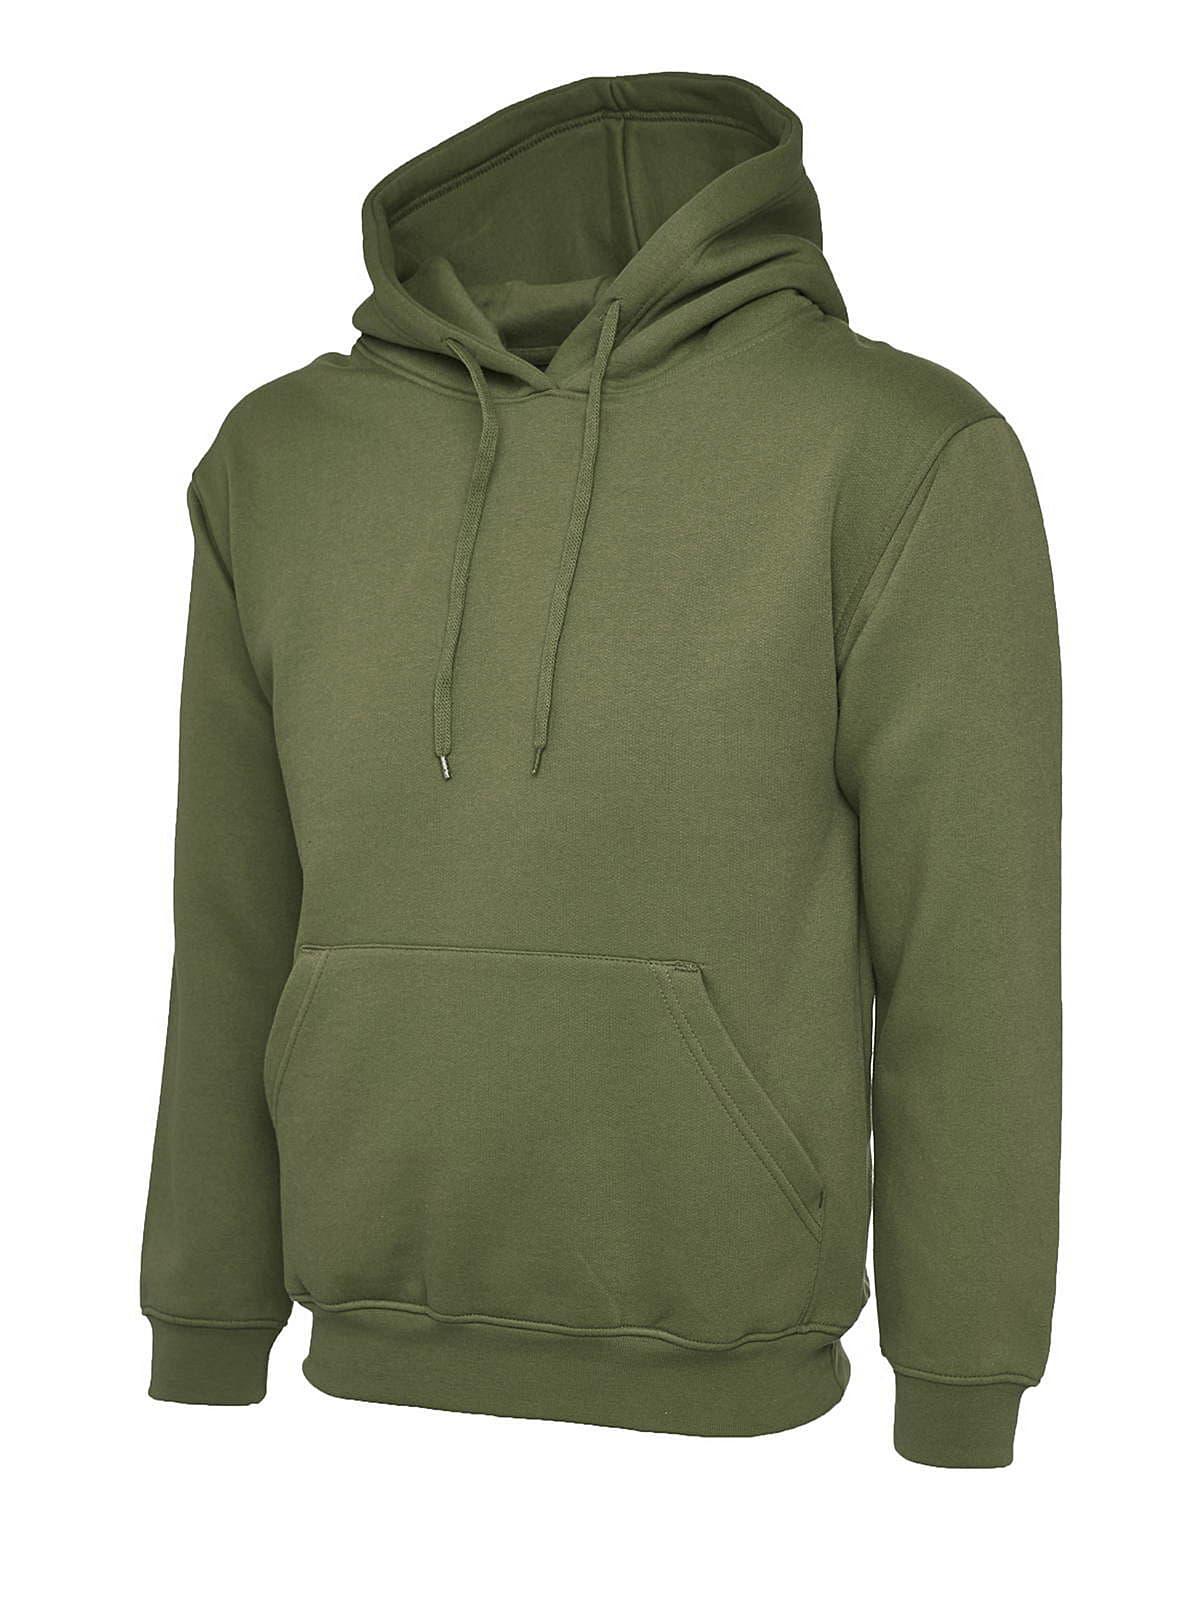 Uneek 300GSM Classic Hoodie in Olive (Product Code: UC502)